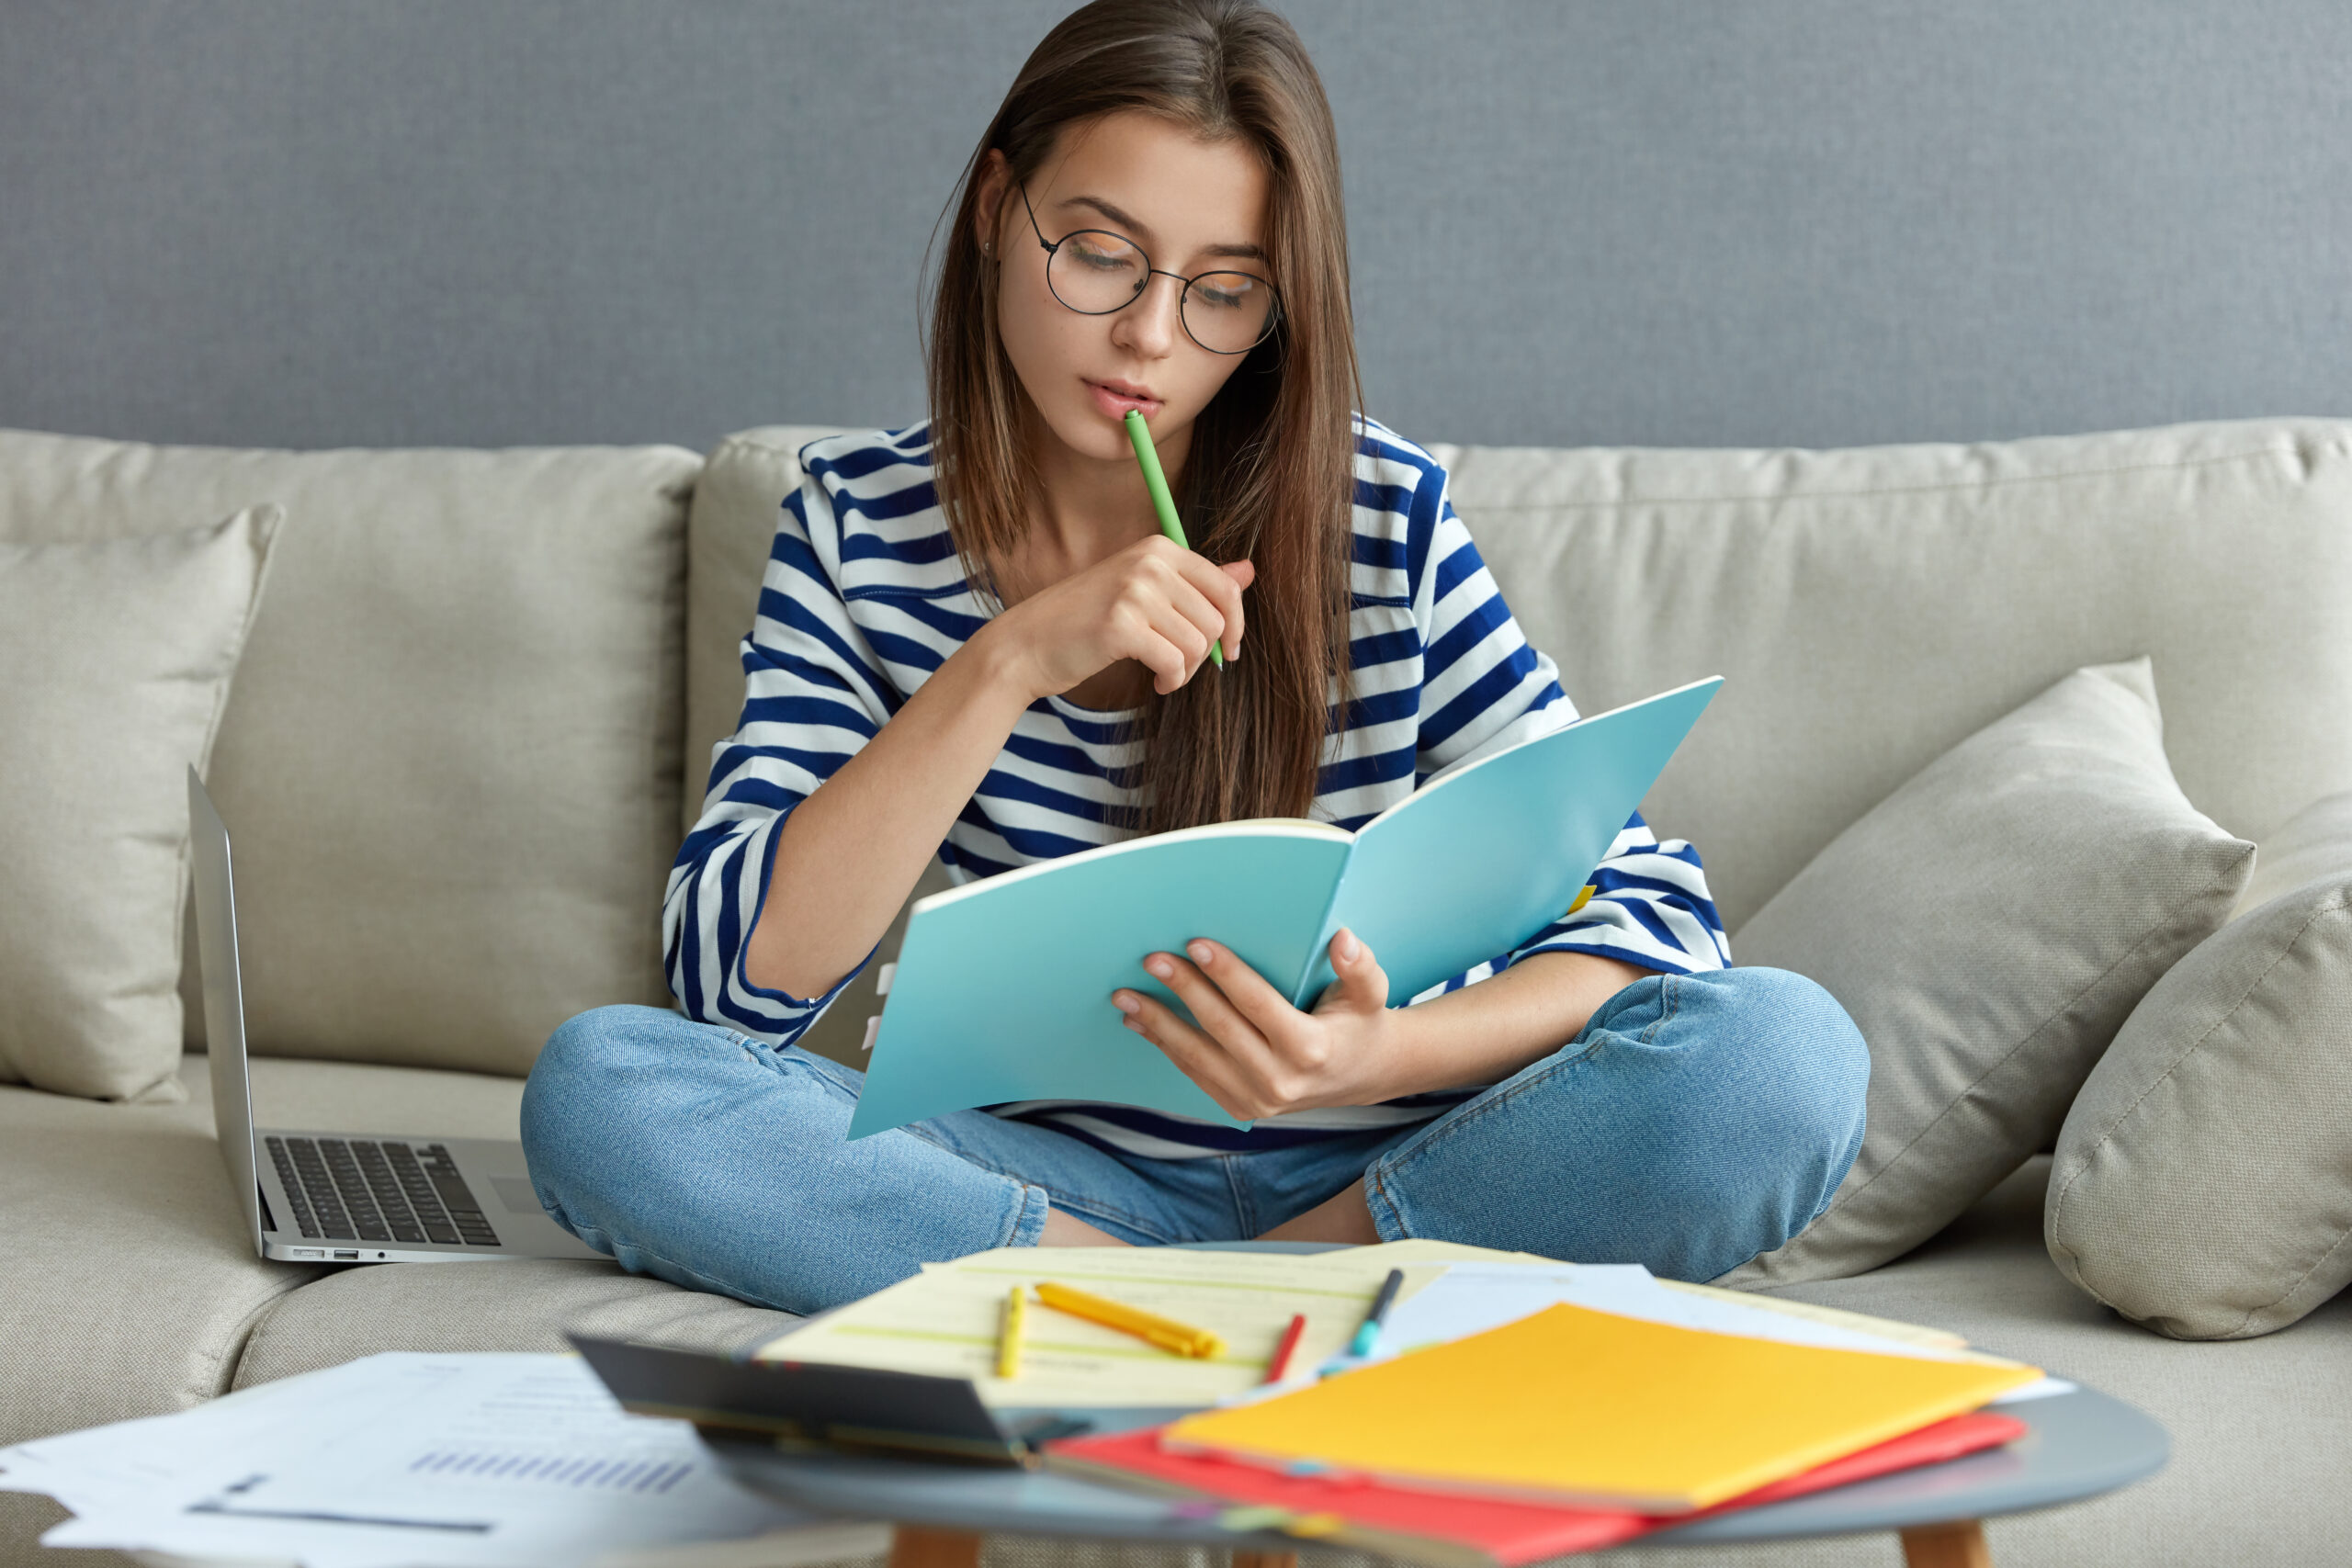 Studying online concept. Serious young woman being busy with remote freelance project, sits at comfortable sofa, writes notes, holds textbook, use laptop computer at home with wireless internet